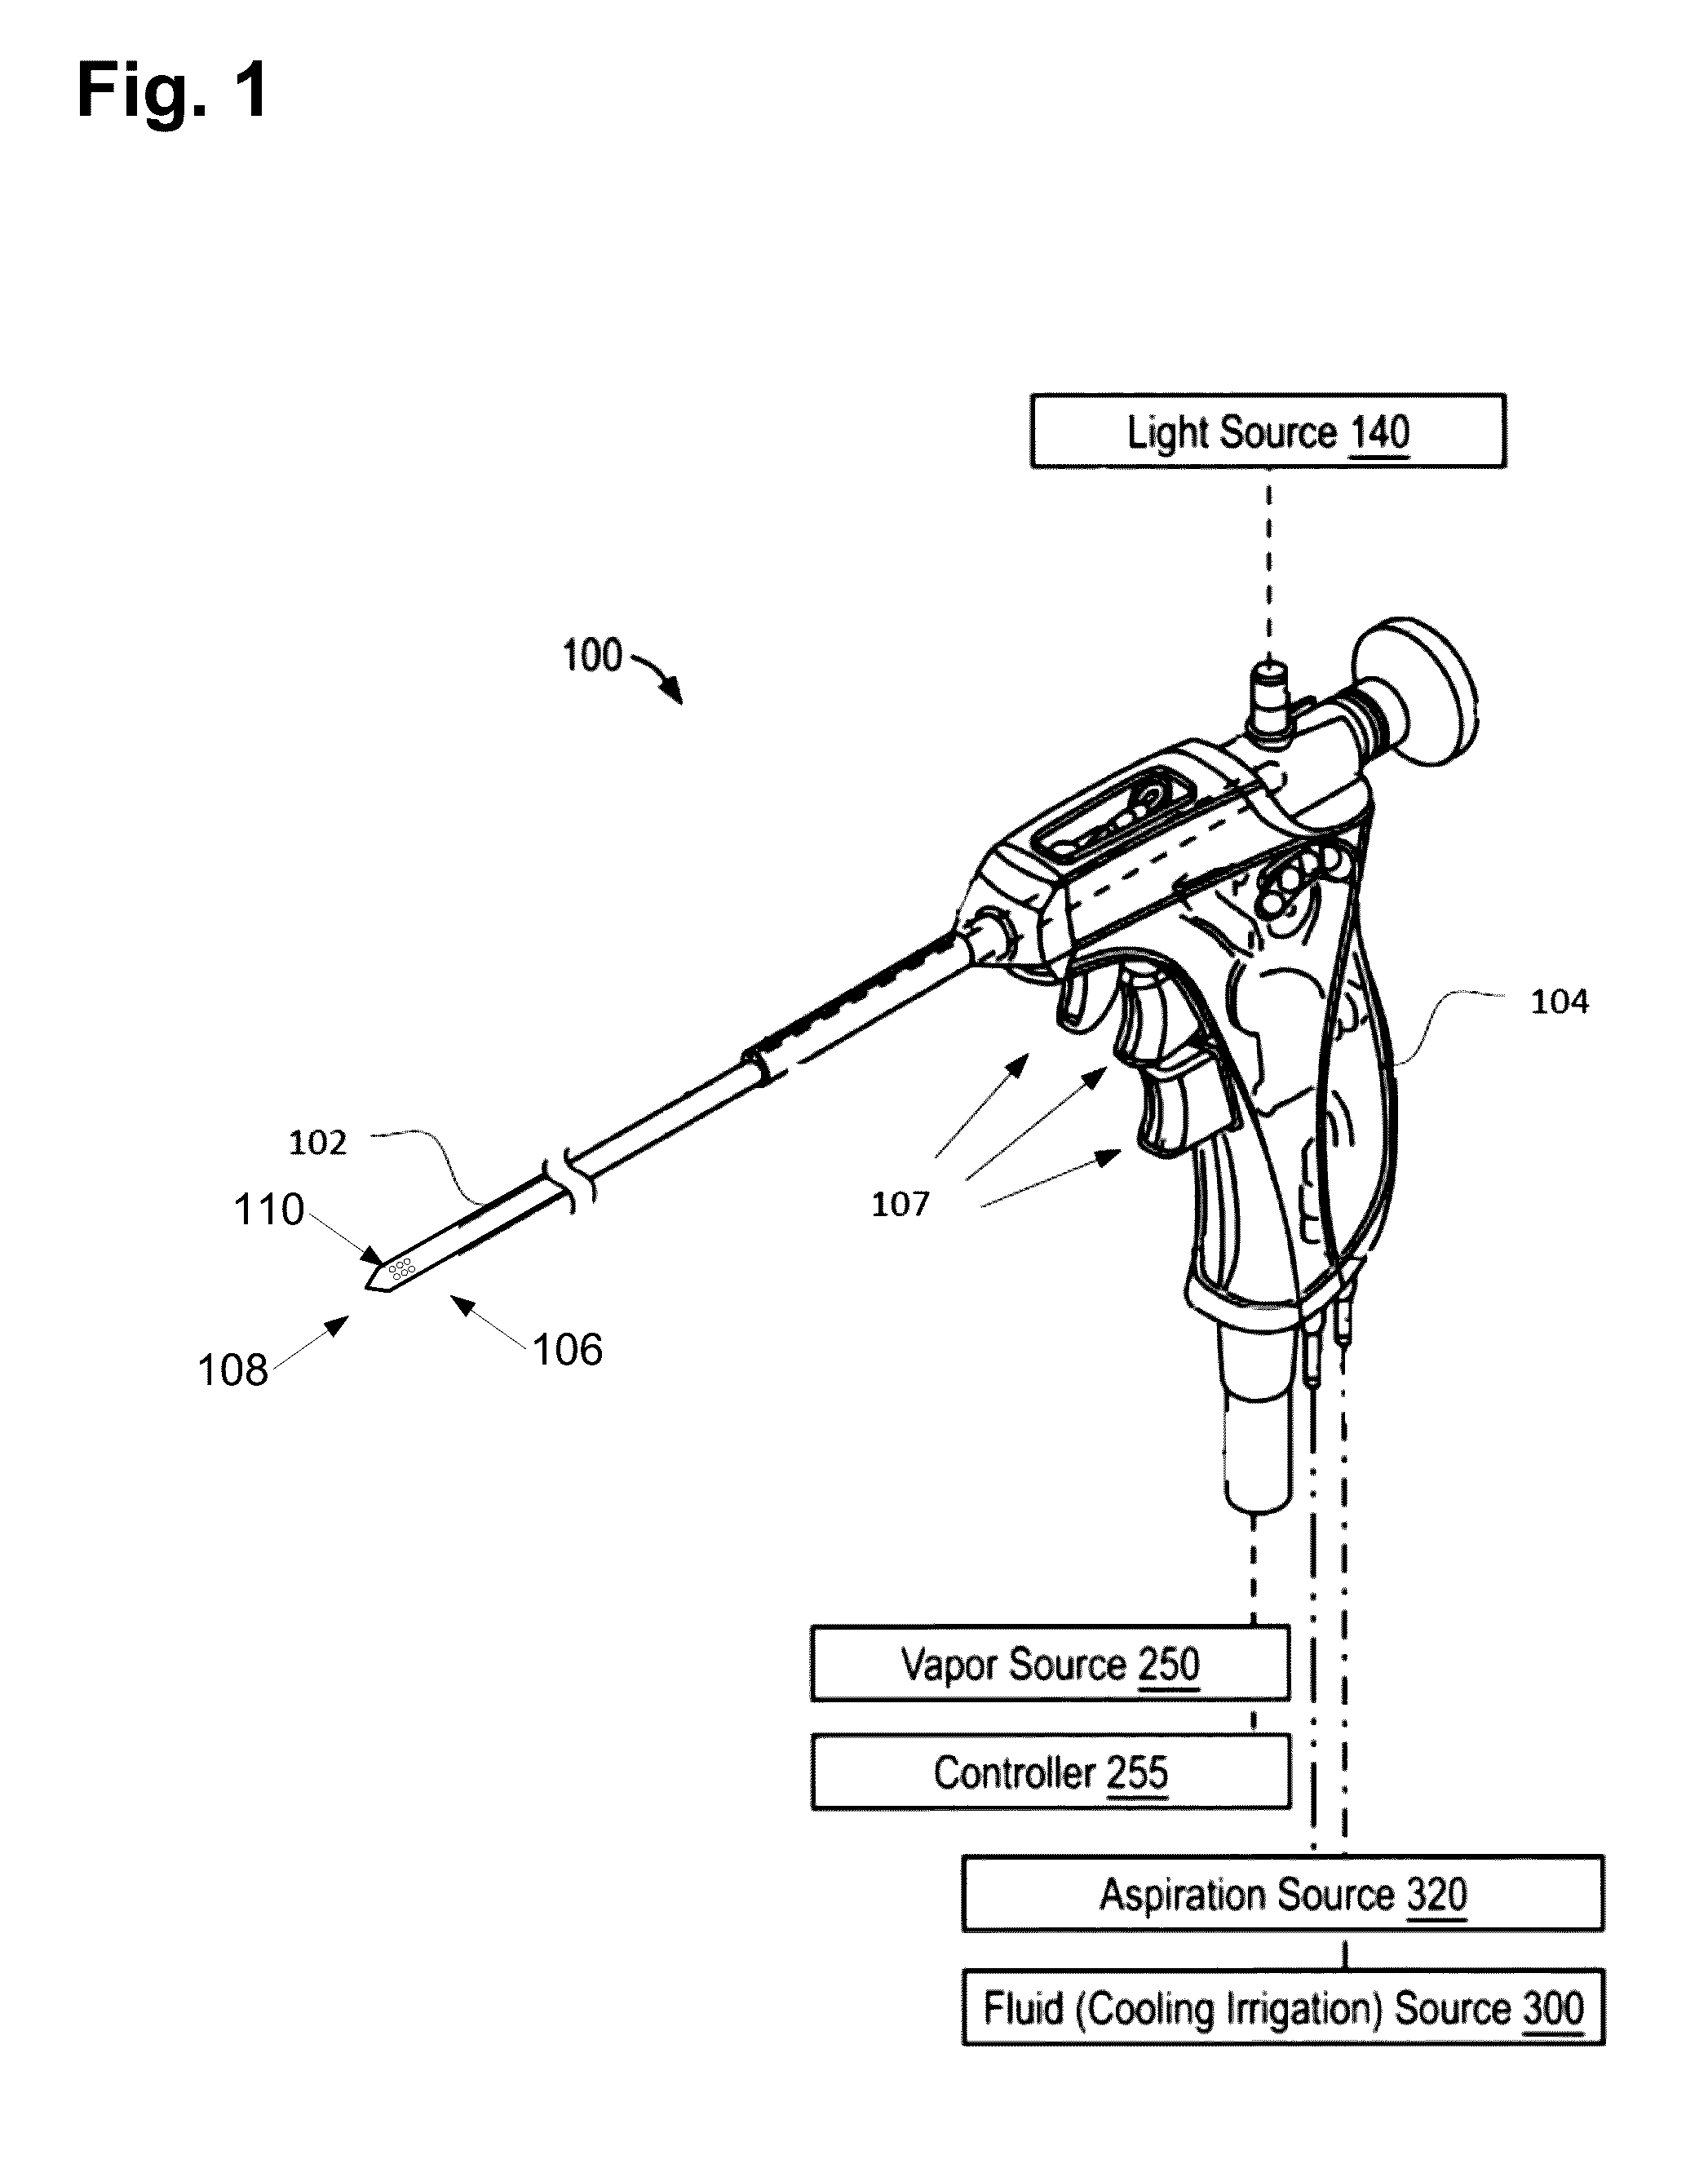 Systems and methods for treating the bladder with condensable vapor